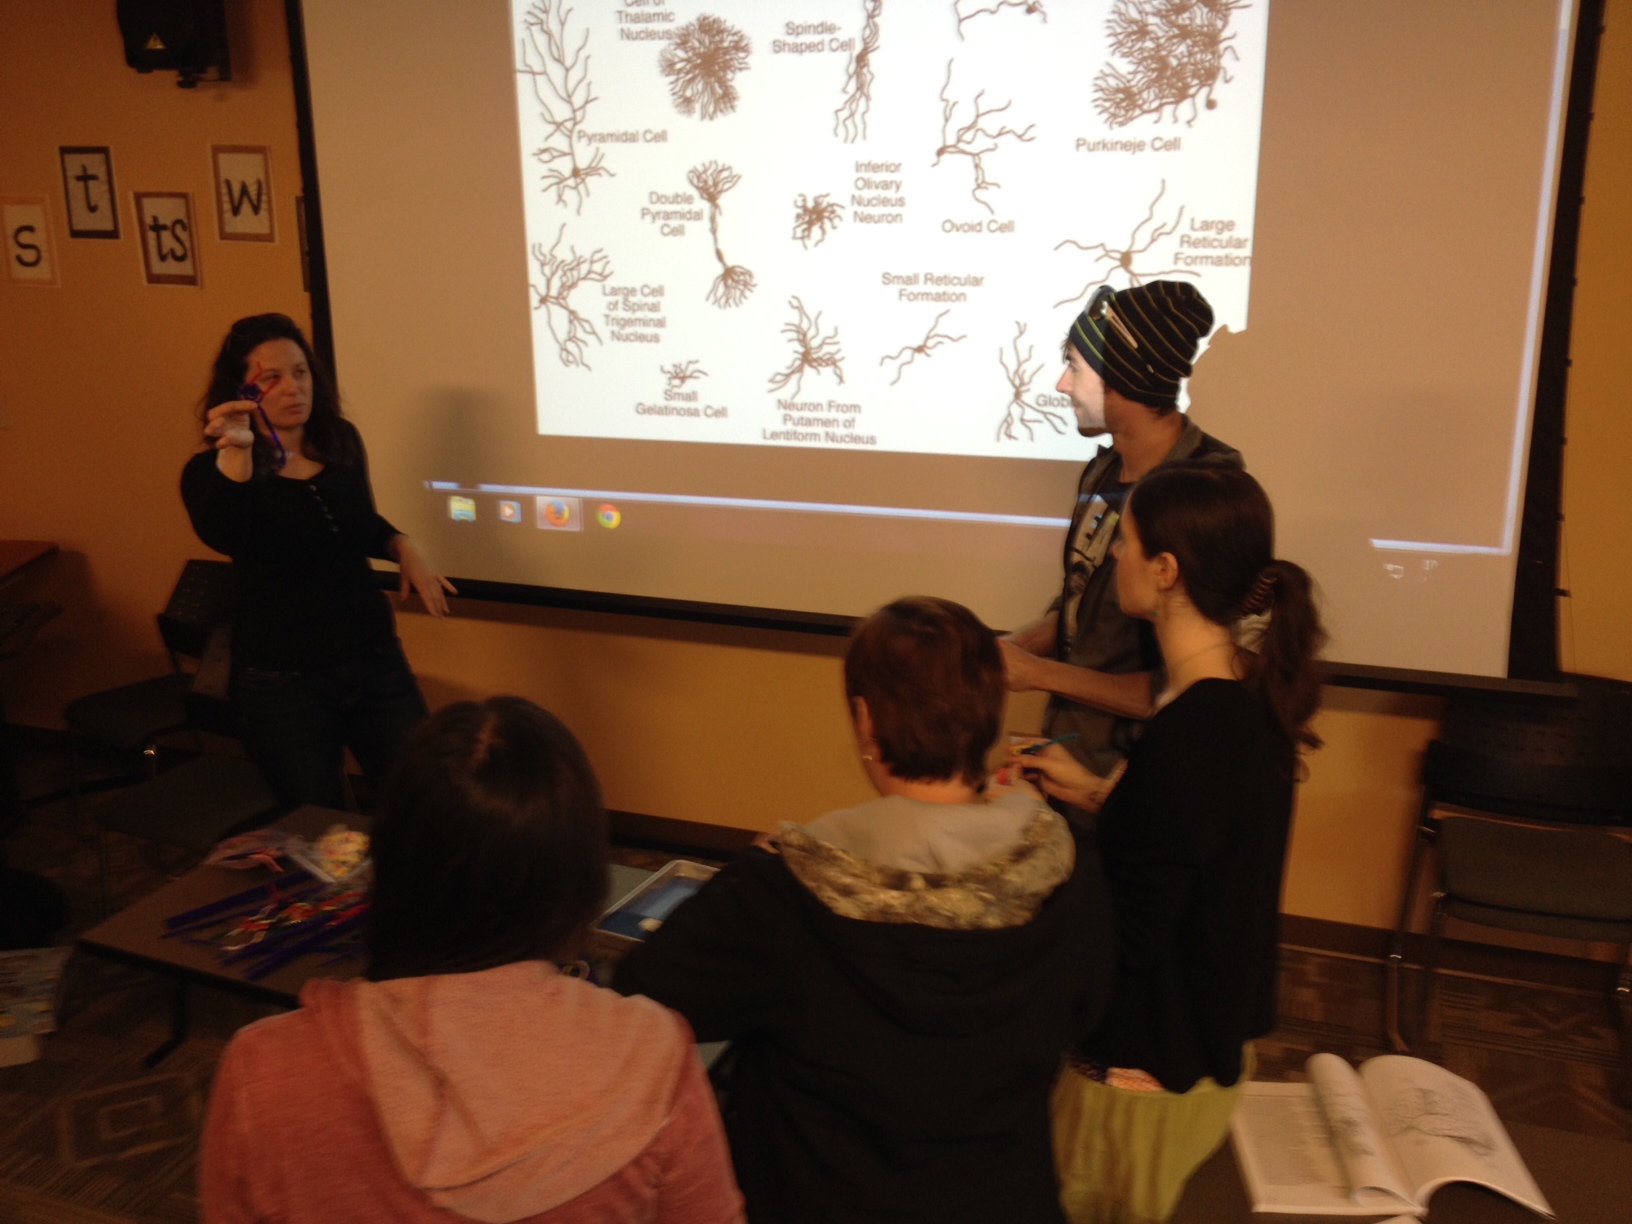 Dr. Amanda Duley and Trio students examining our brain collection in a UM classroom.